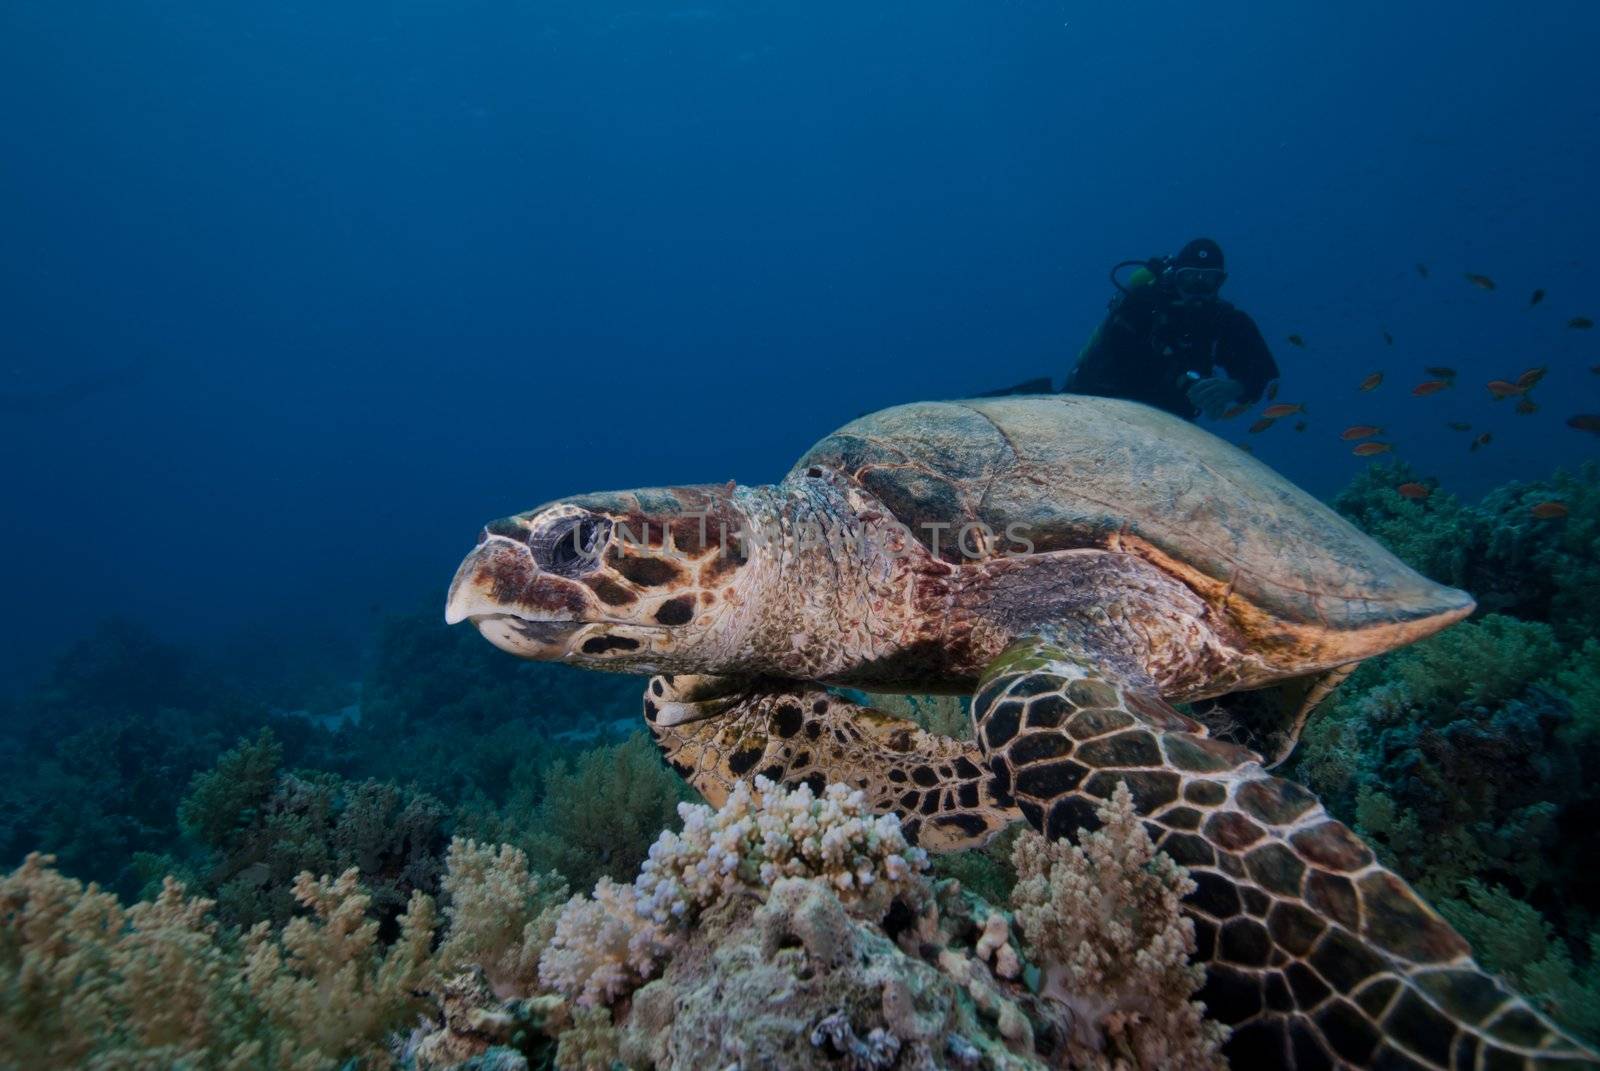 Hawksbill turtle by markdoherty